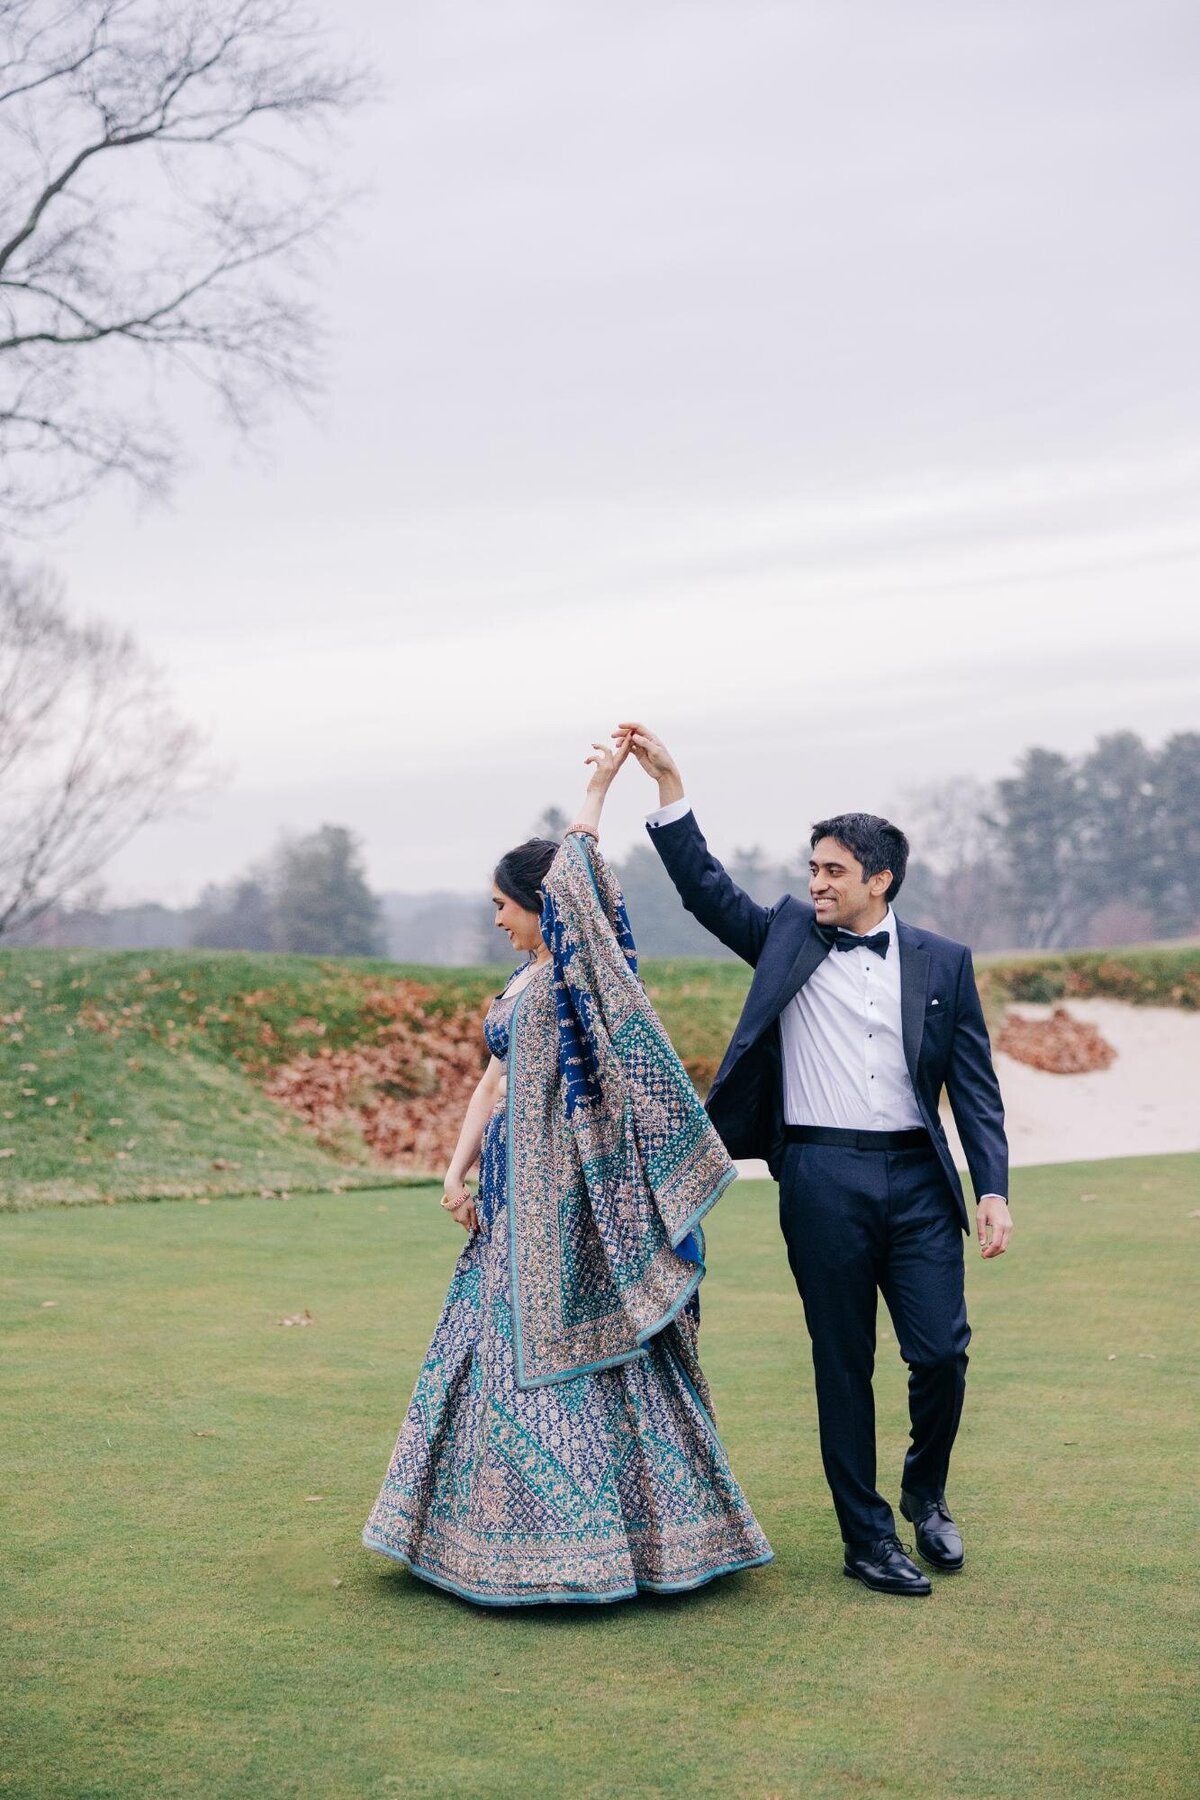 A couple joyfully dances on a golf course; the woman is in a vibrant, embroidered sari, and the man is in a black tuxedo.